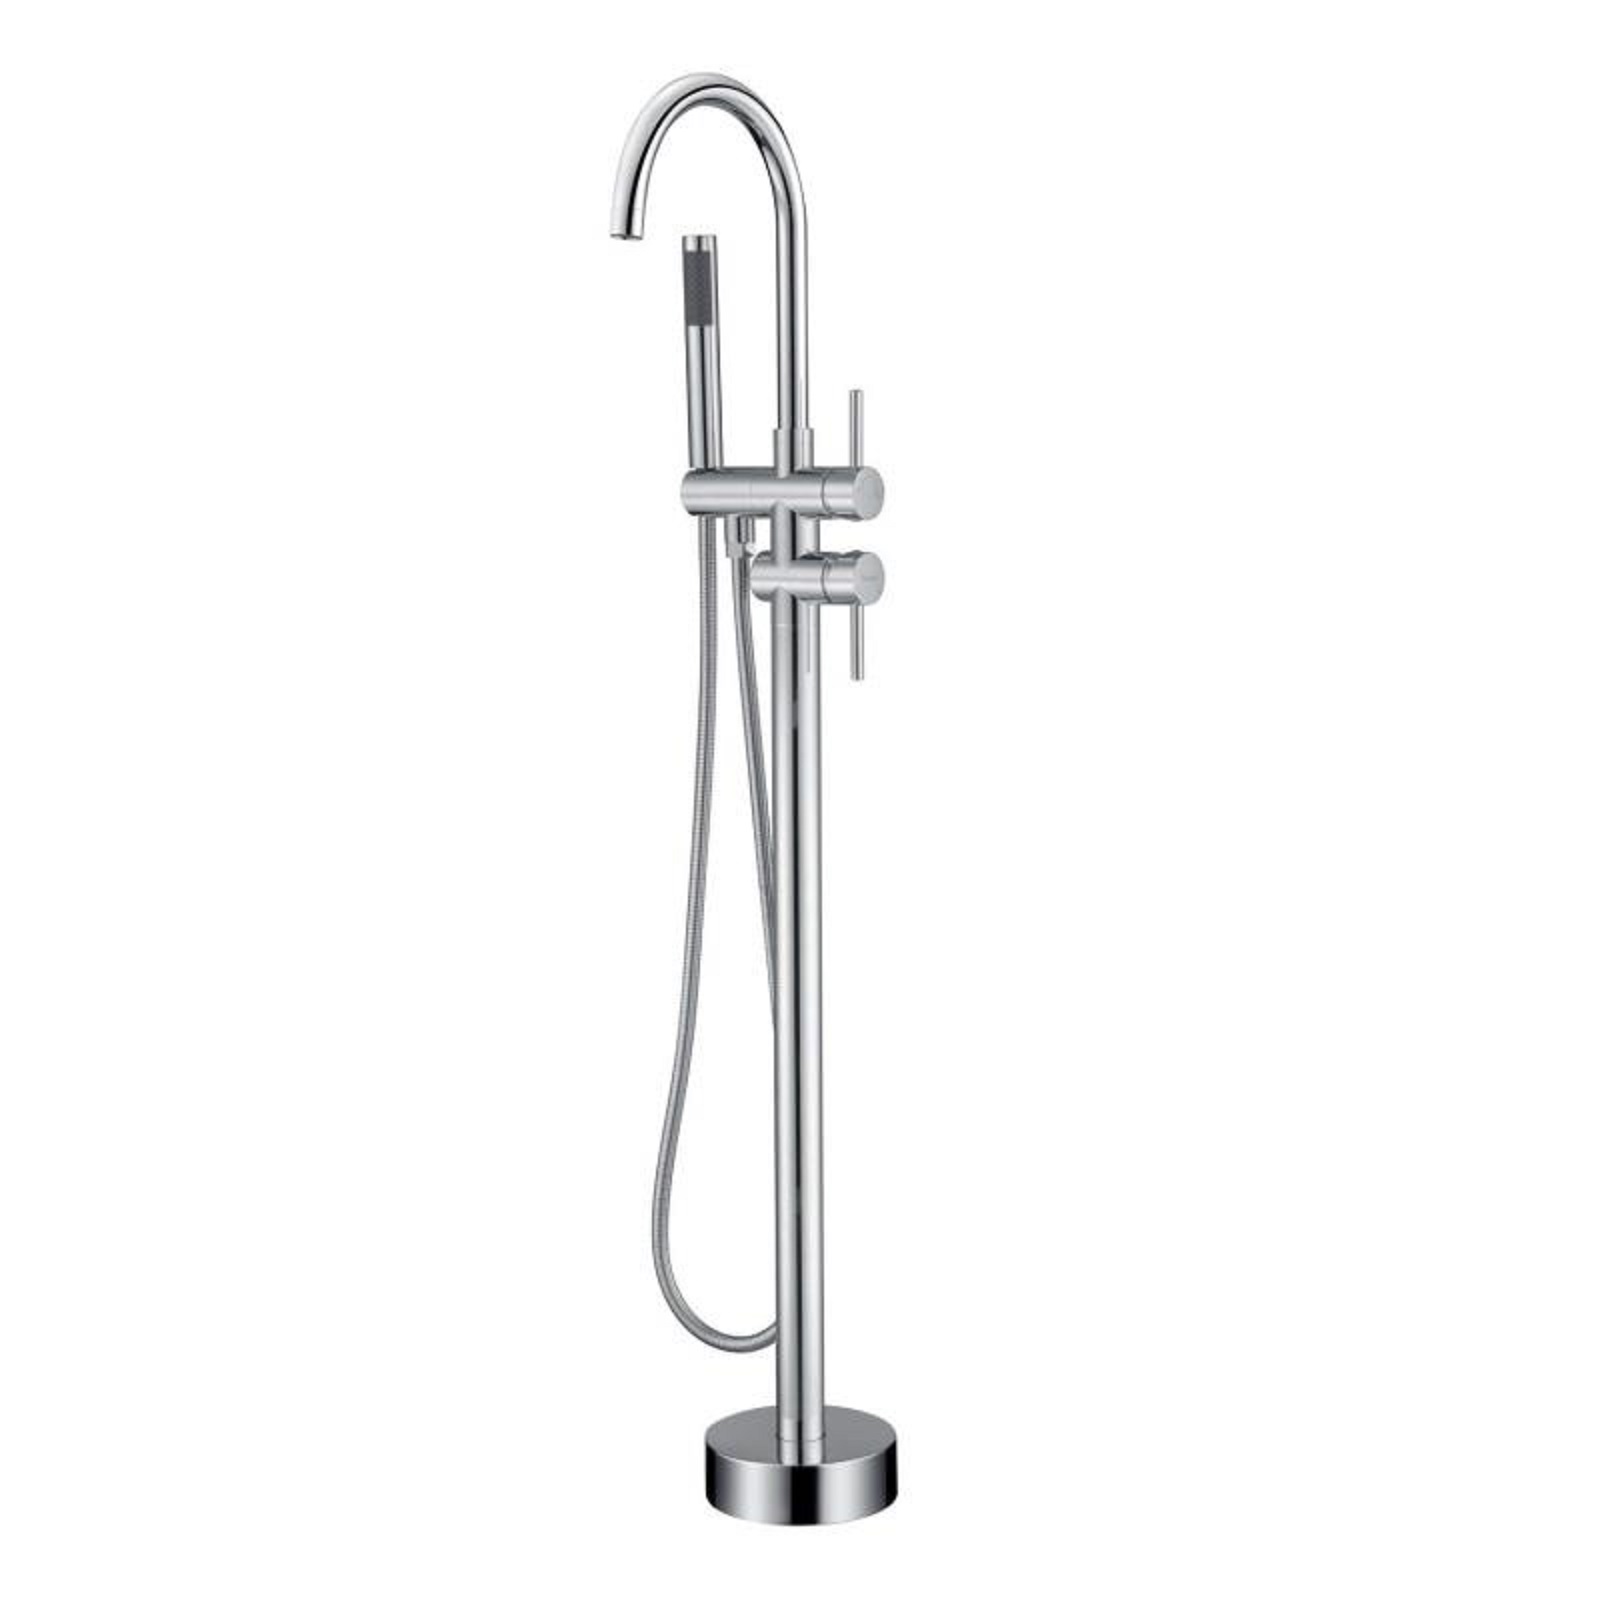 Jet-Line Bathtub Stand-Fitting, chrome plated - rounded version